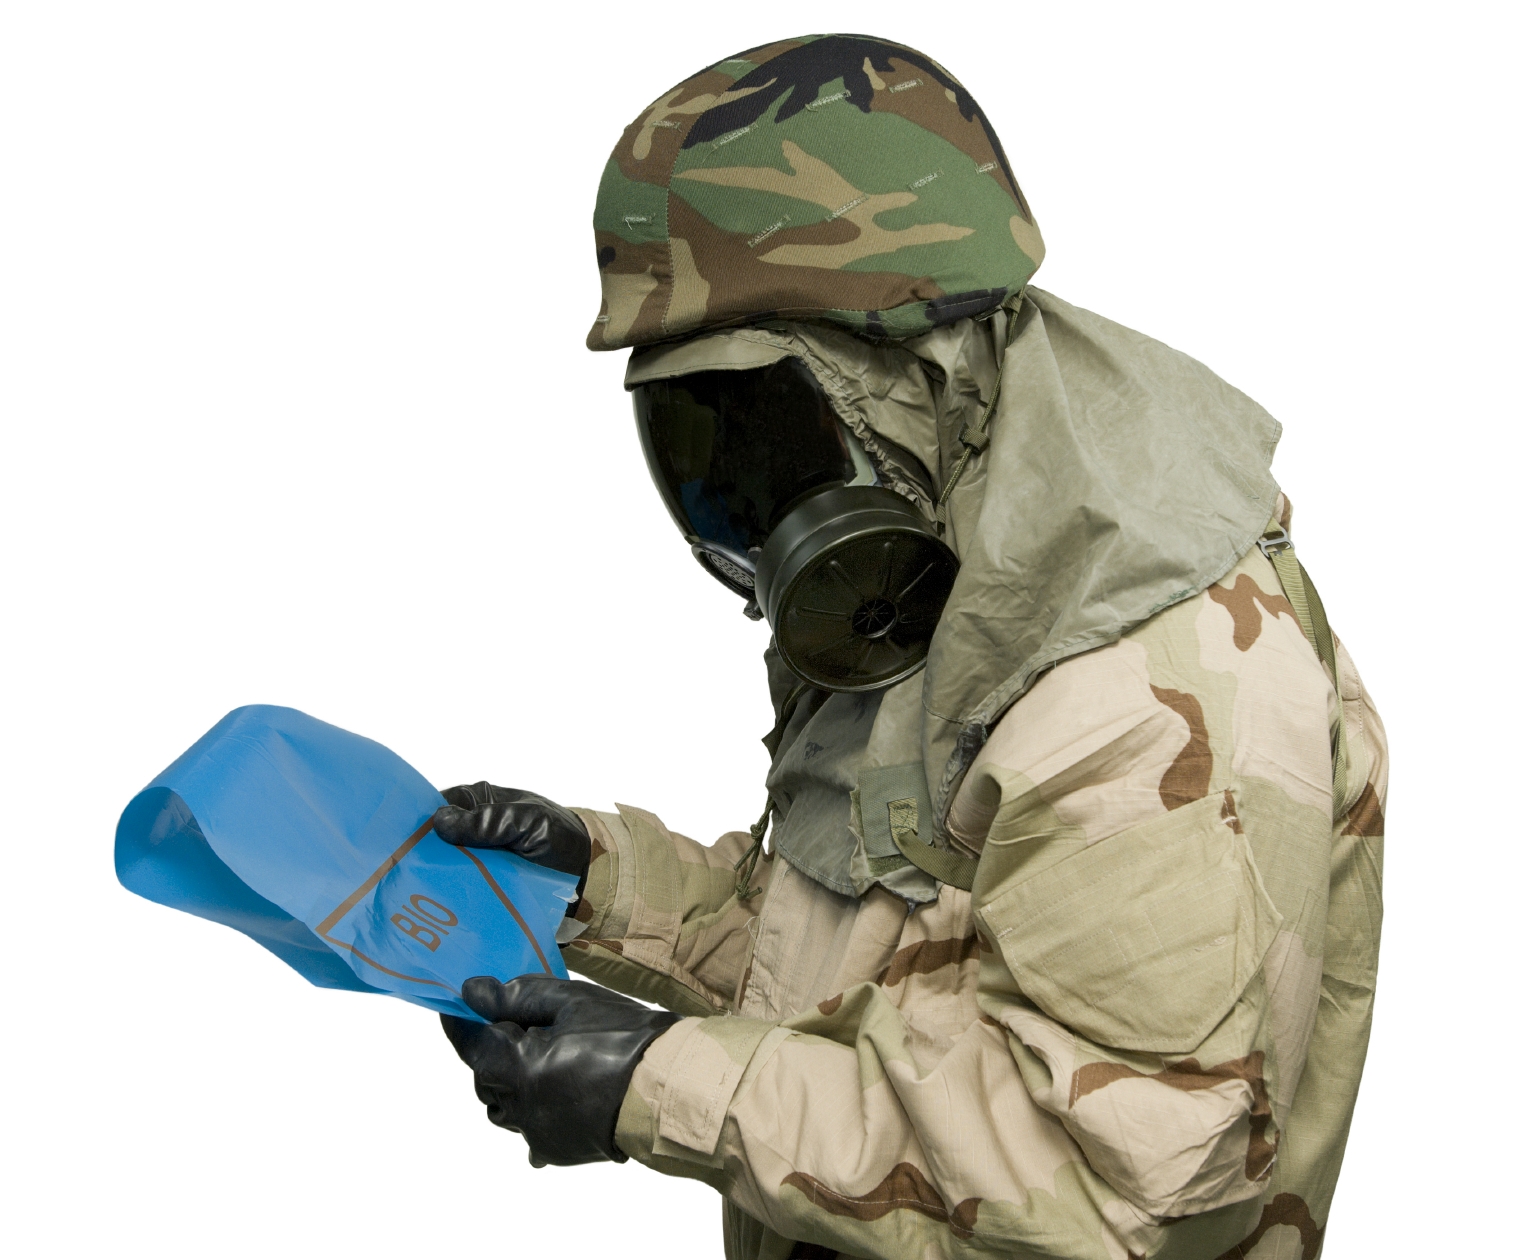 US Army scientists have developed a kit of environmentally friendly cleaning agents to neutralize nerve gas, anthrax spores, and other toxic substances that could be used in terrorist attacks. Photo: iStock